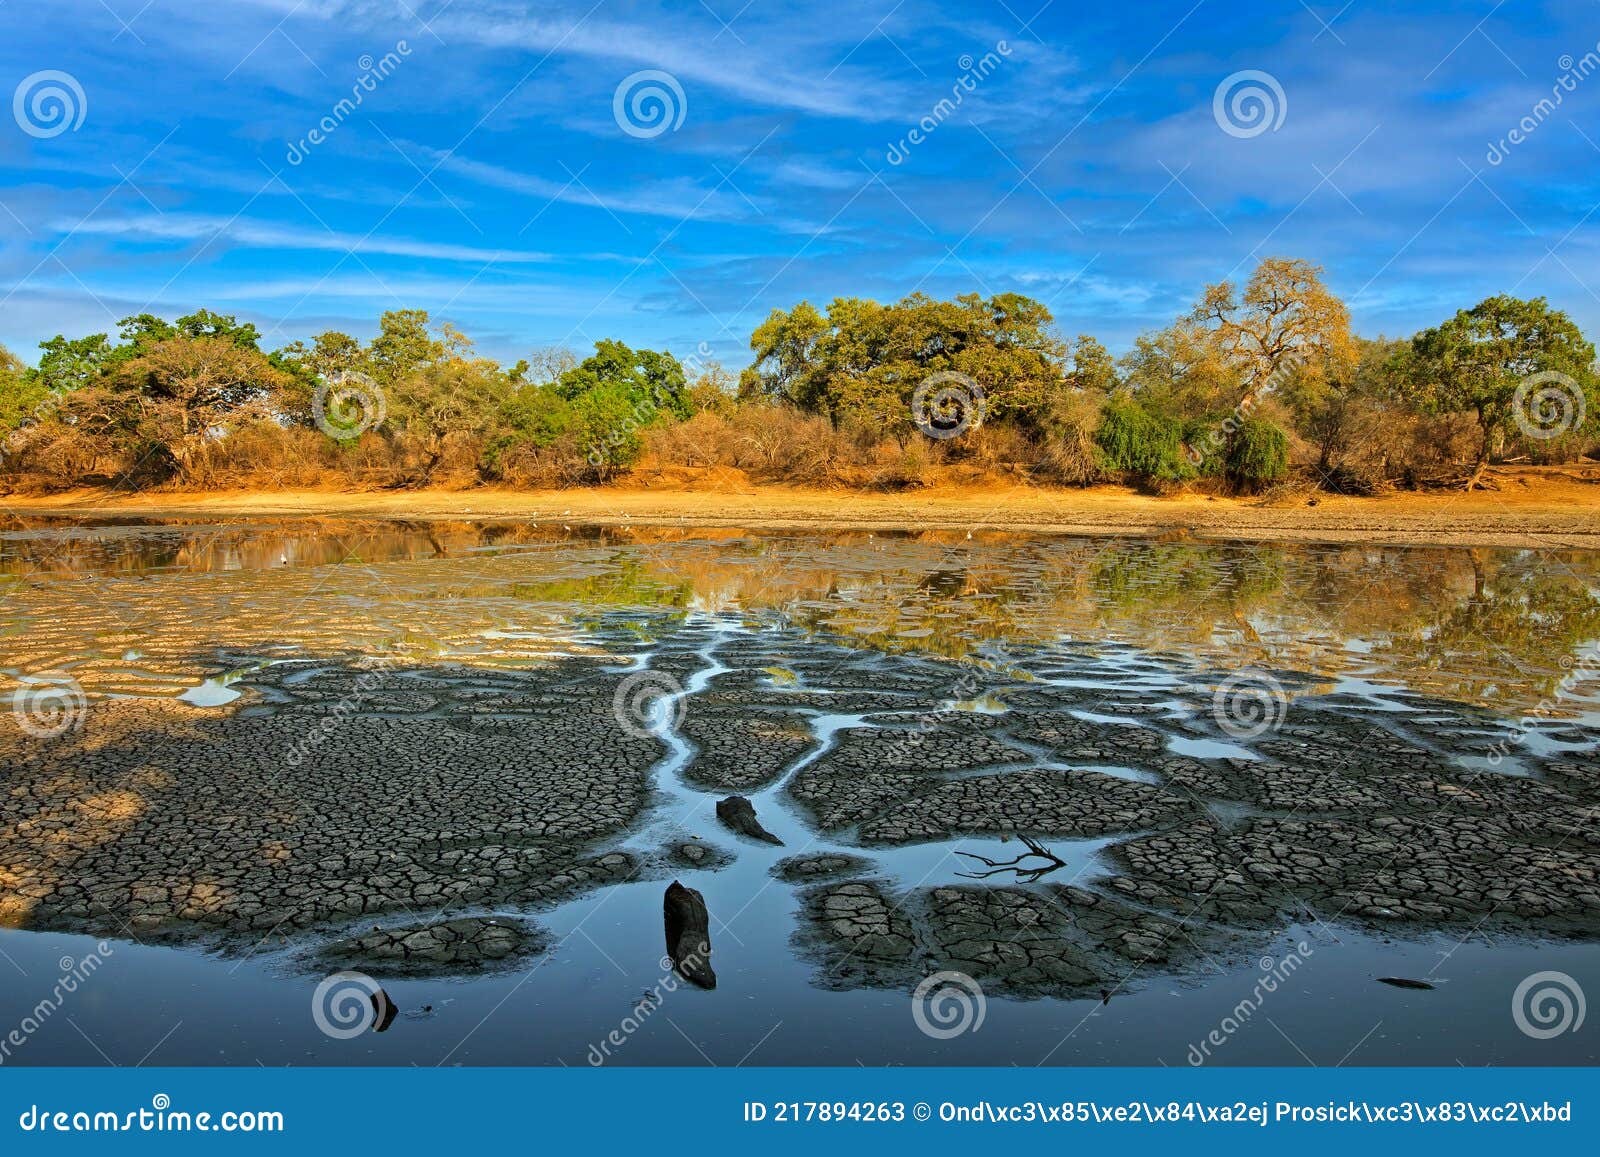 Dry Africa. Nature Habitat, Water Pond, India. Wildlife Scene from Nature, Mana Pools NP, Zimbabwe in Africa. Water with Stock Image - Image of pool, himantopus: 217894263